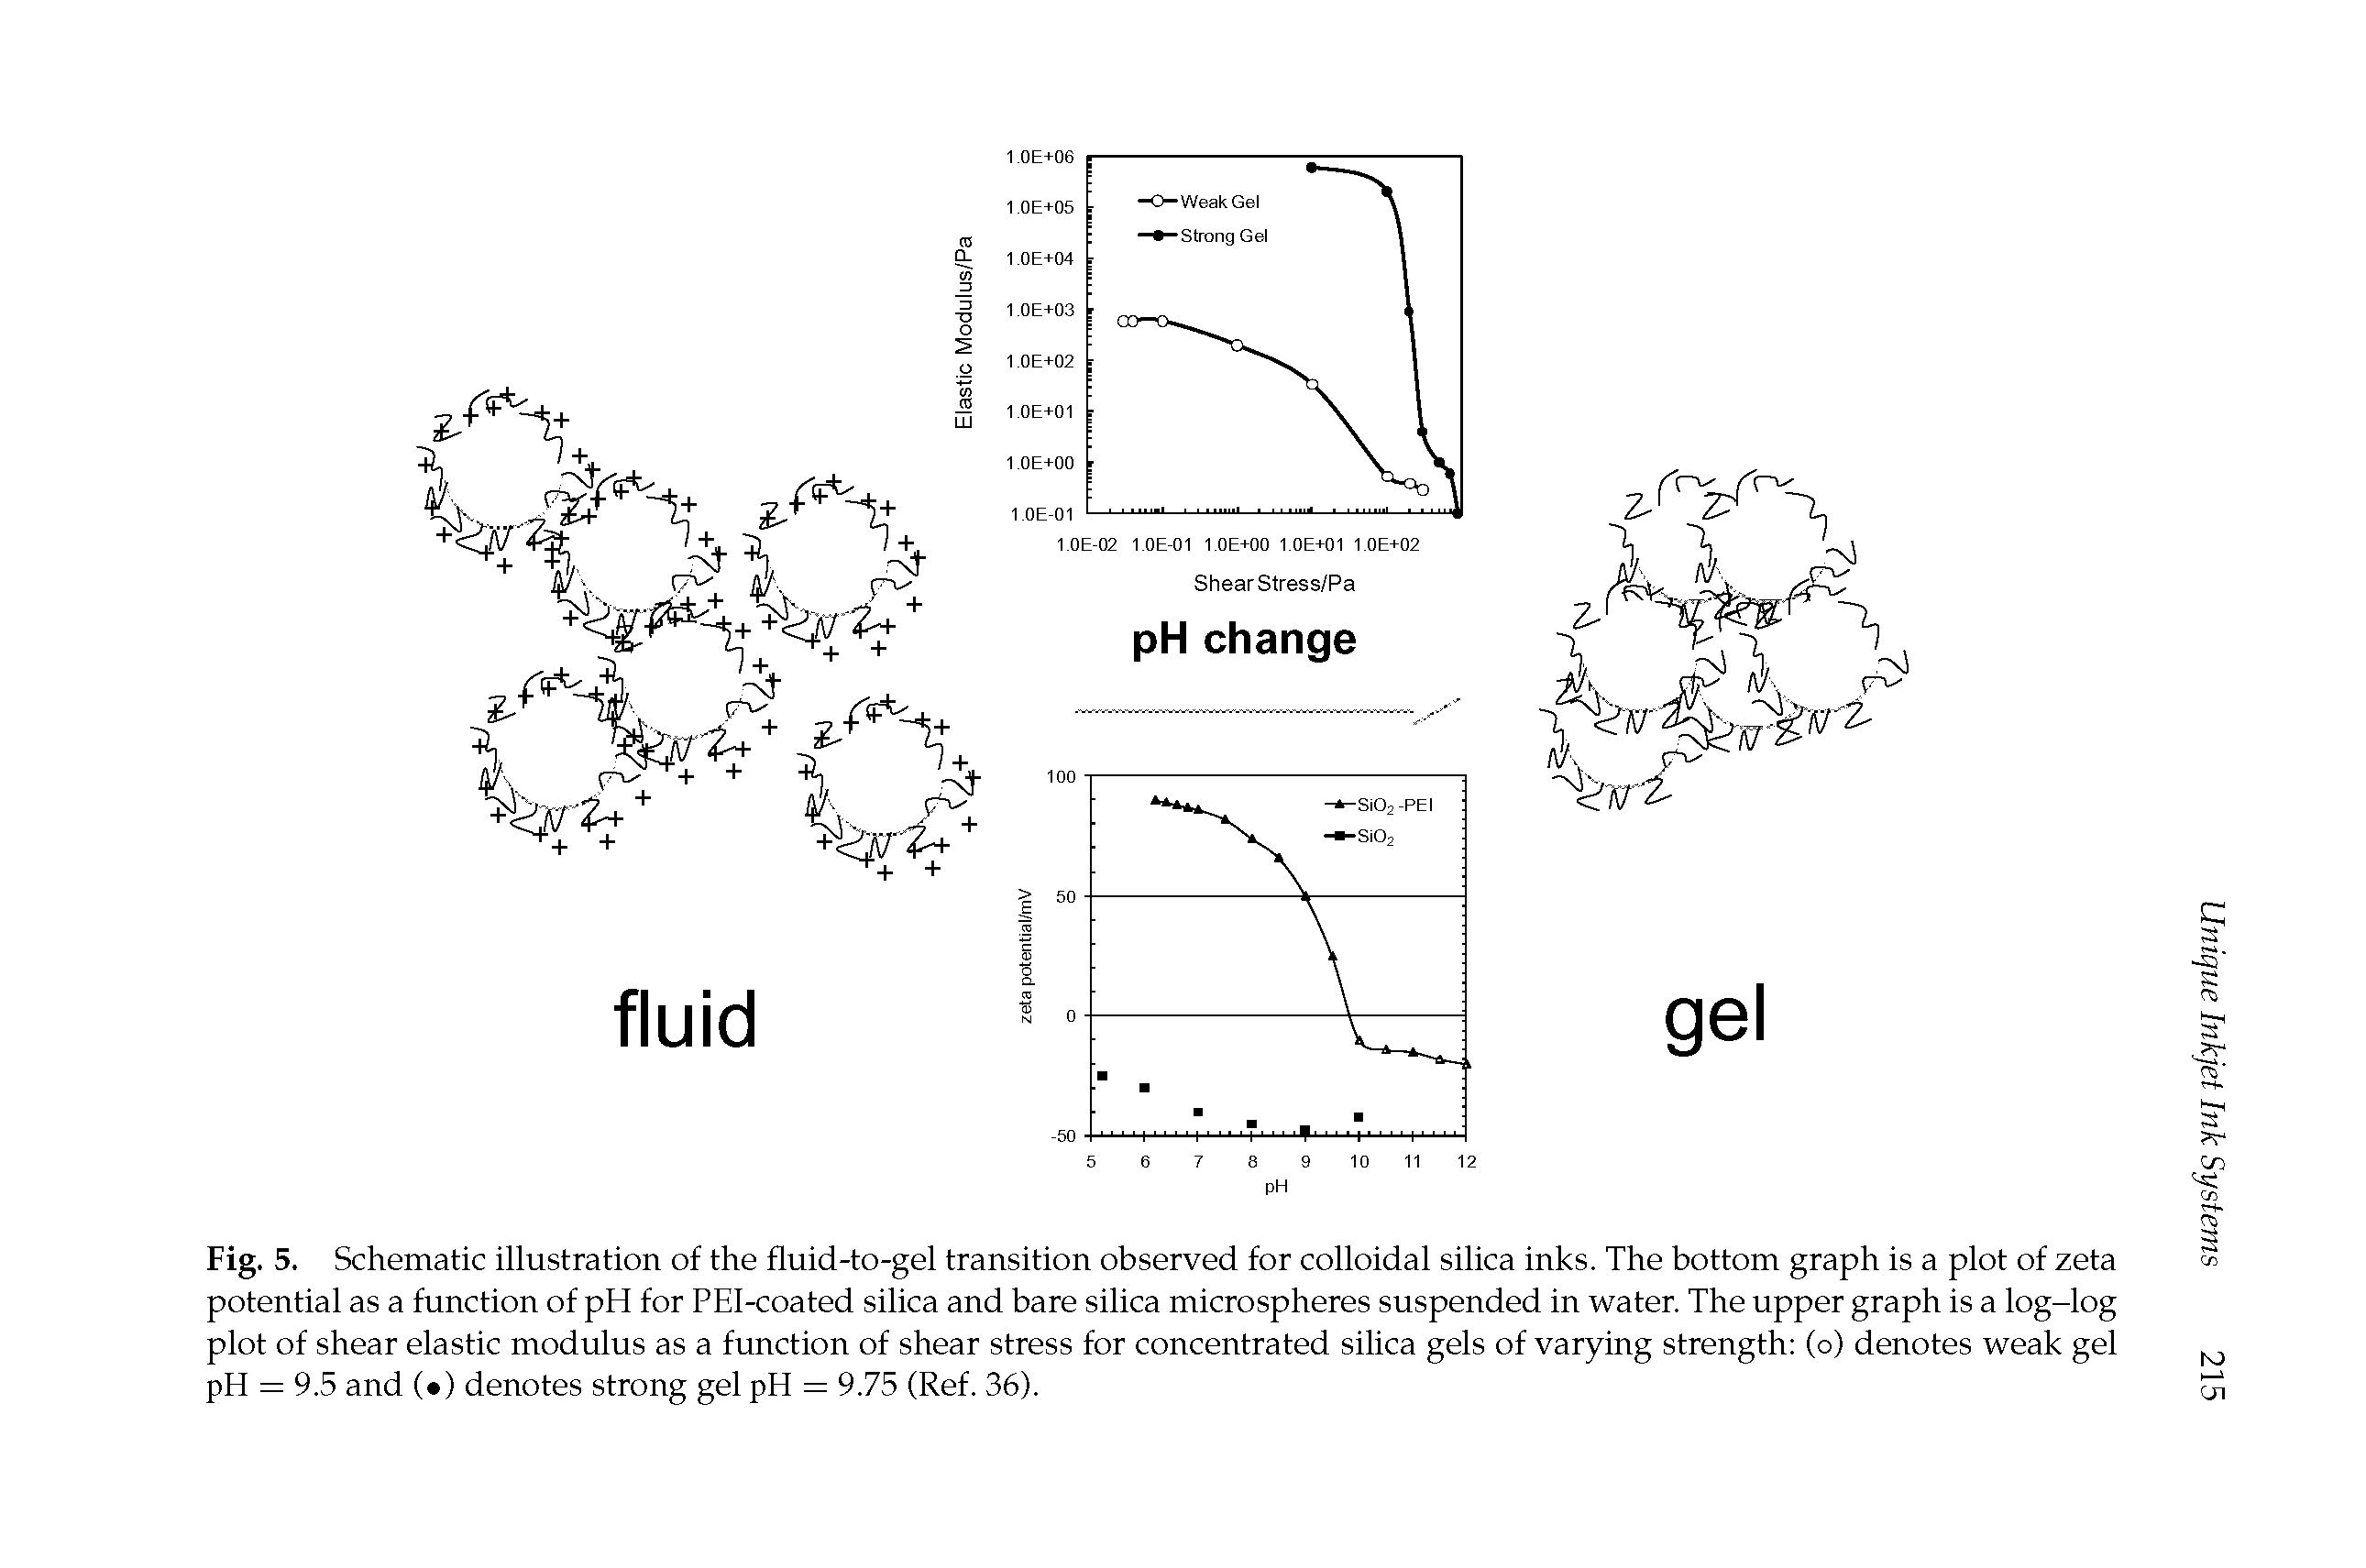 Fig. 5. Schematic illustration of the fluid-to-gel transition observed for colloidal silica inks. The bottom graph is a plot of zeta potential as a function of pH for PEl-coated silica and bare silica microspheres suspended in water. The upper graph is a log-log plot of shear elastic modulus as a function of shear stress for concentrated silica gels of varying strength (o) denotes weak gel pH = 9.5 and ( ) denotes strong gel pH = 9.75 (Ref. 36).